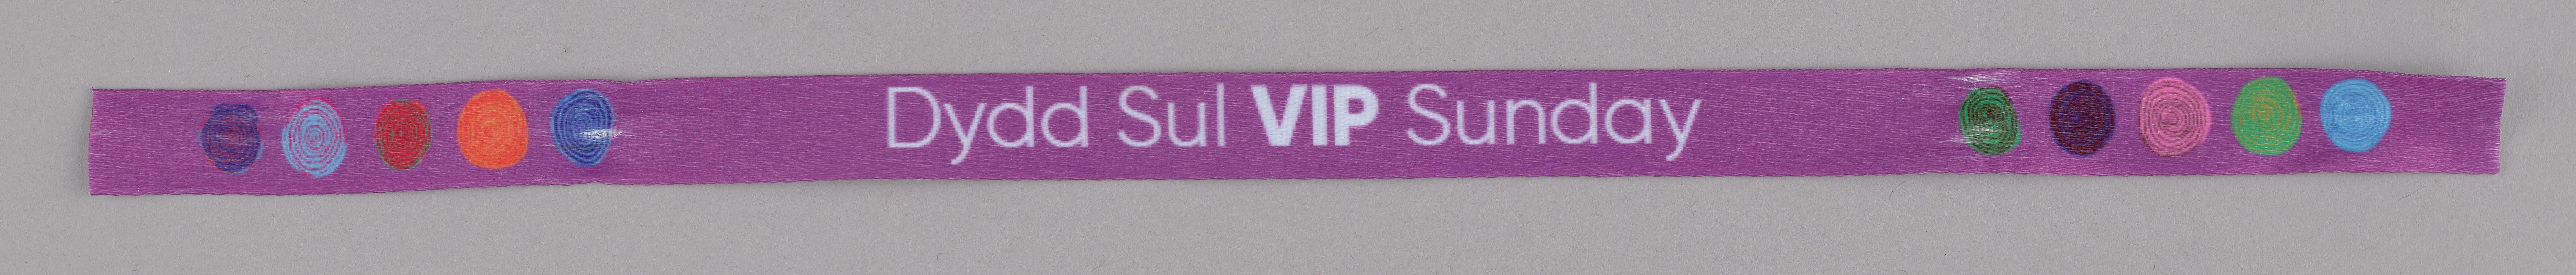 Wristband 'Dydd Sul VIP Sunday'. Used for access to VIP area at Pride Cymru, Cardiff, Sunday 27 August 2022.